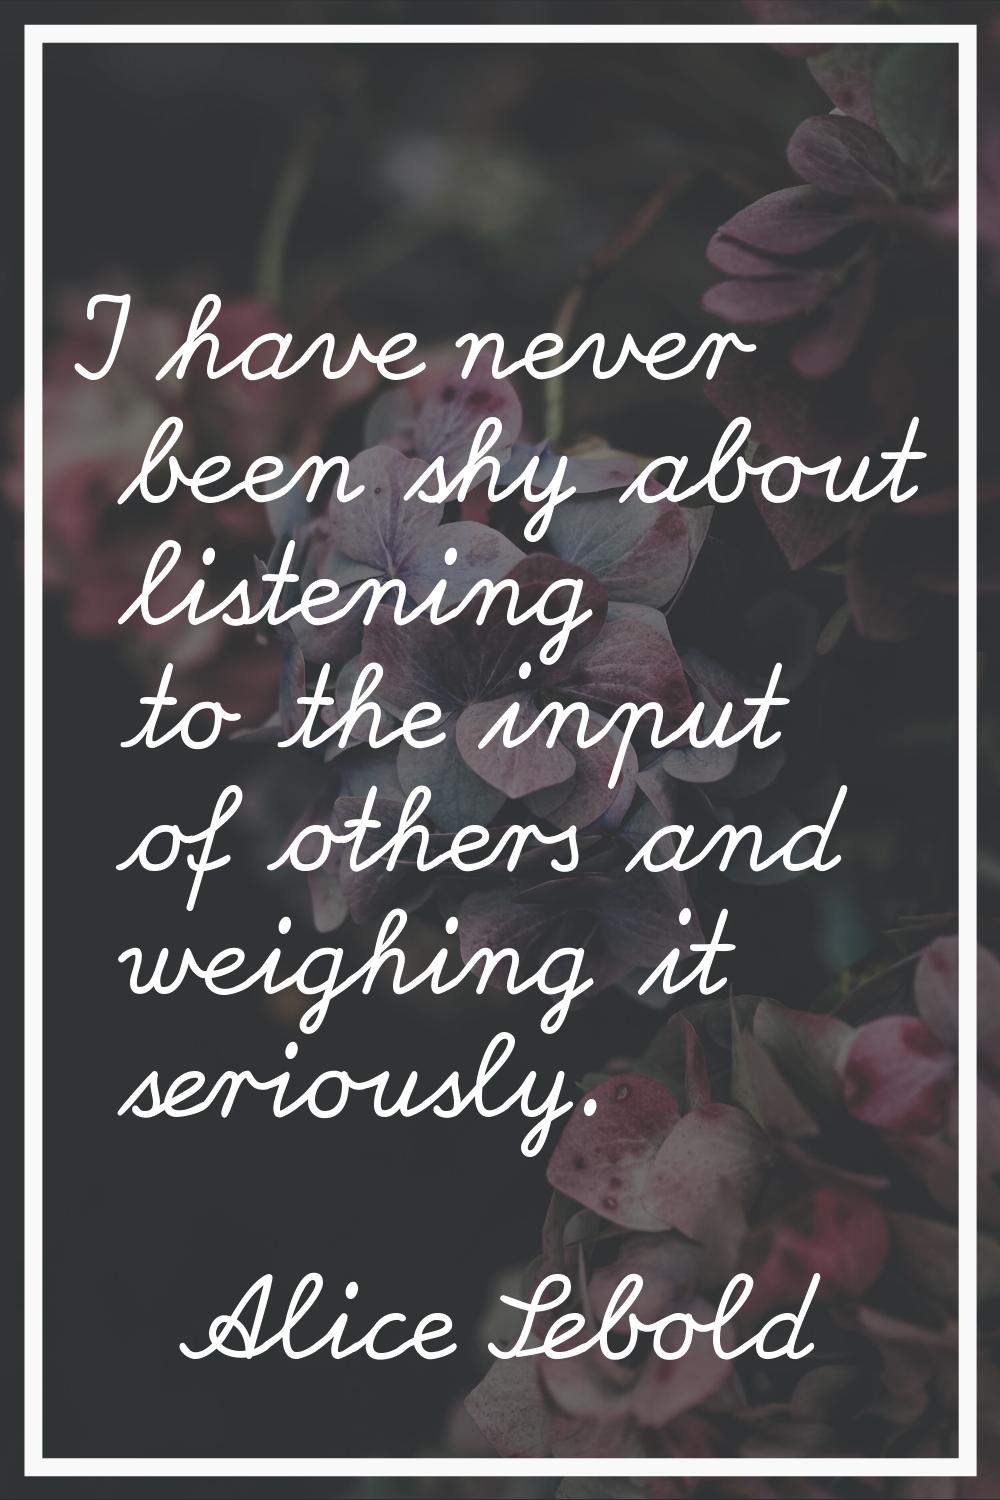 I have never been shy about listening to the input of others and weighing it seriously.